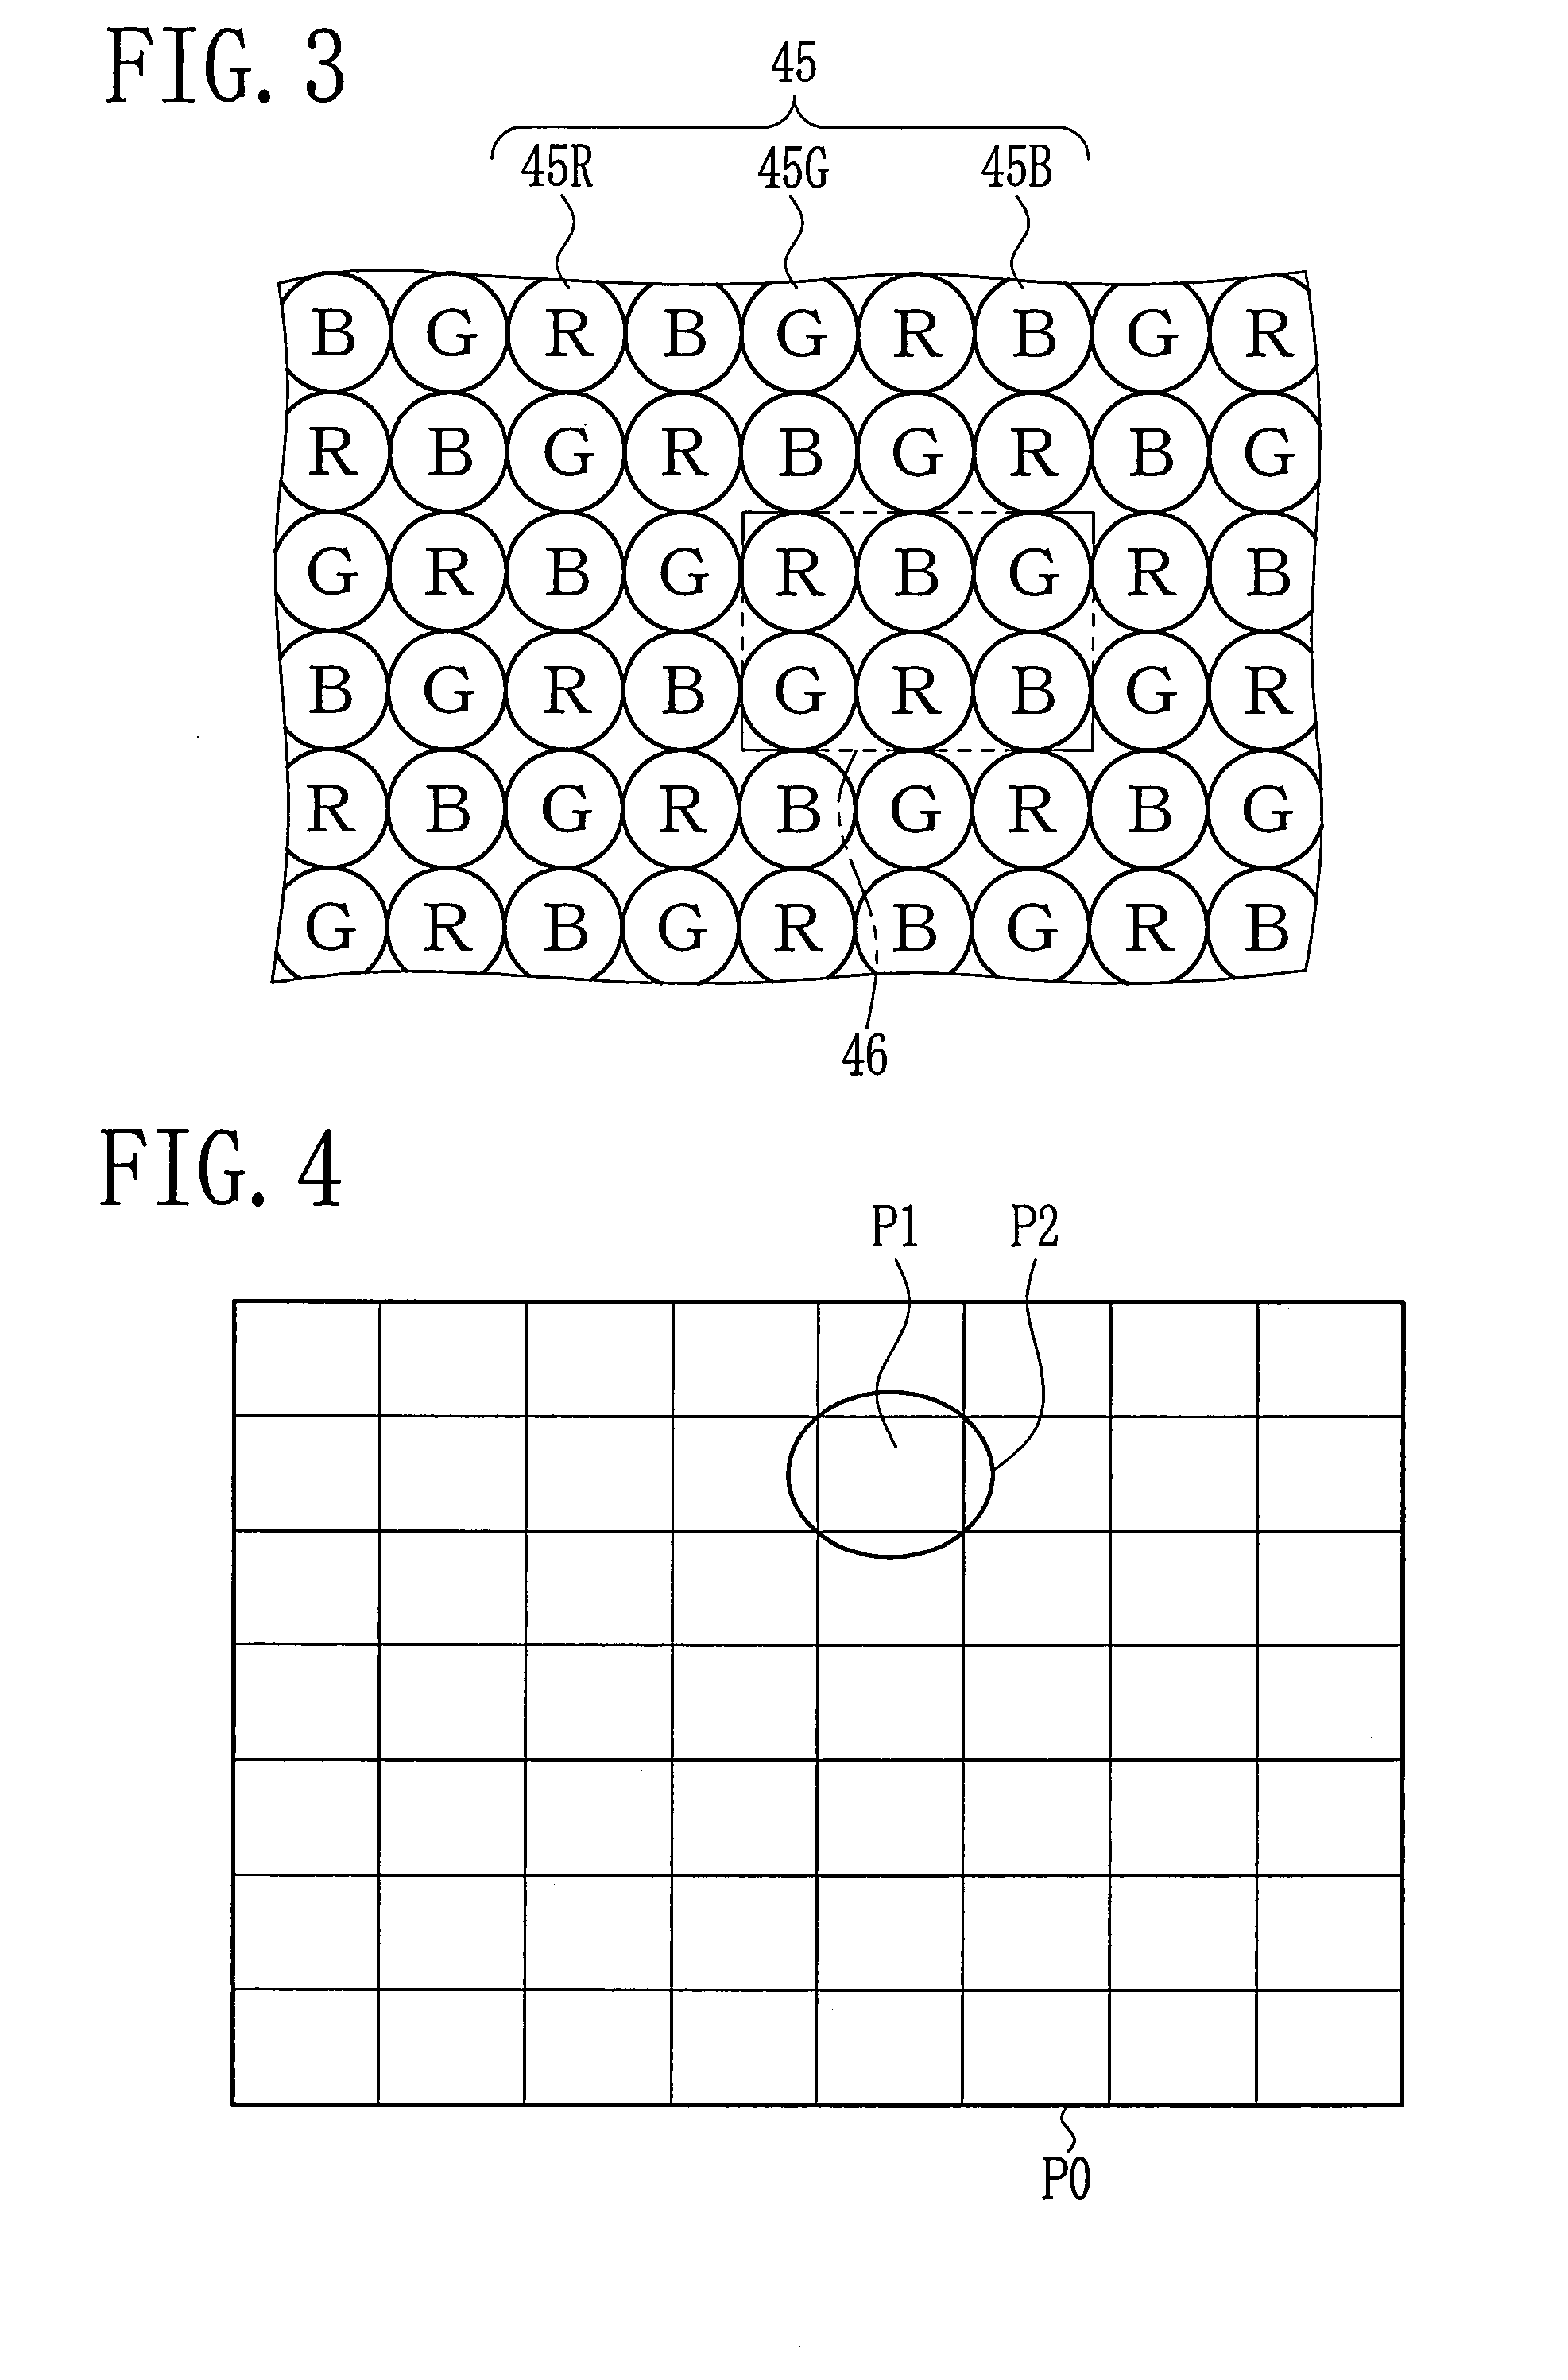 Image capturing apparatus with flash device having an LED array